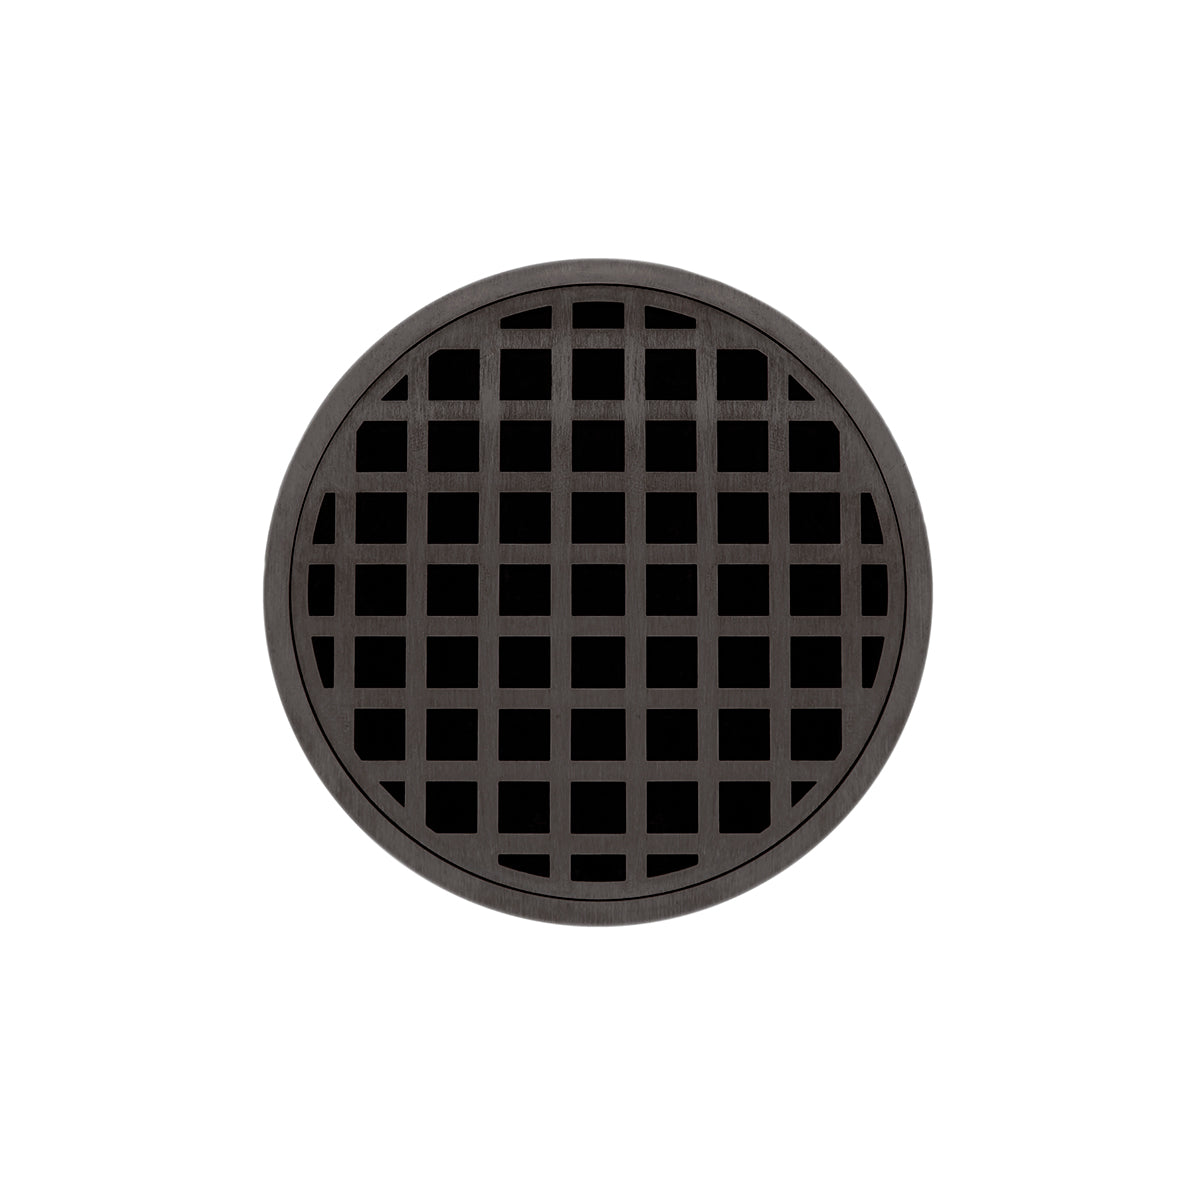 Infinity Drain 5" Round RQD 5 Premium Center Drain Kit with Squares Pattern Decorative Plate with Cast Iron Drain Body for Hot Mop, 2" Outlet